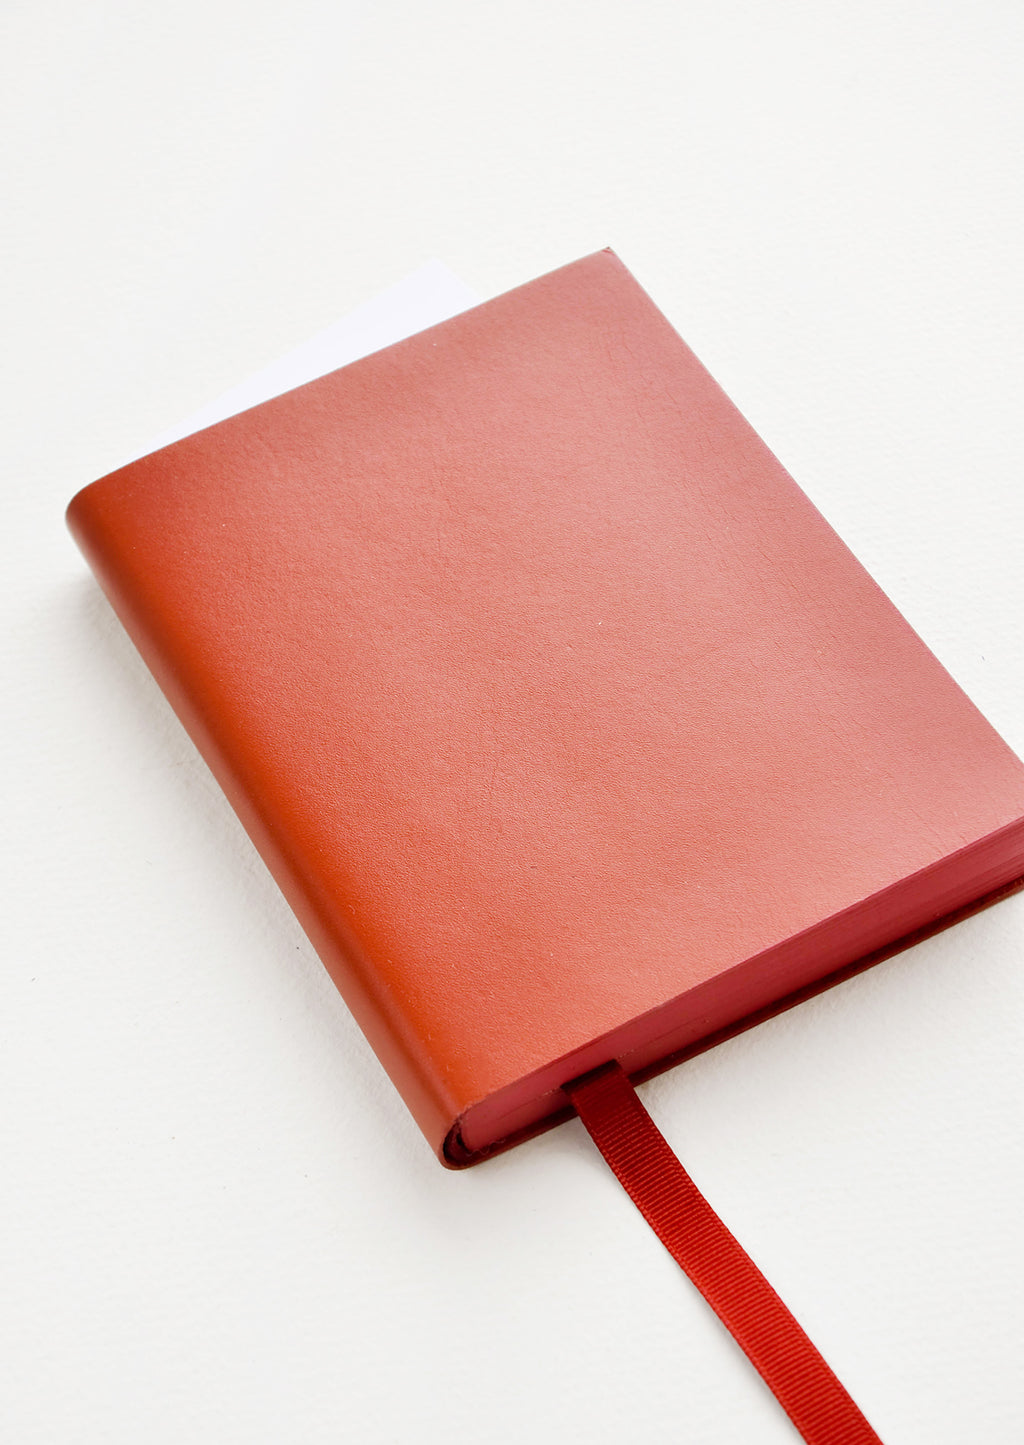 Rust: Rust brown leather notebook with grosgrain ribbon bookmark.